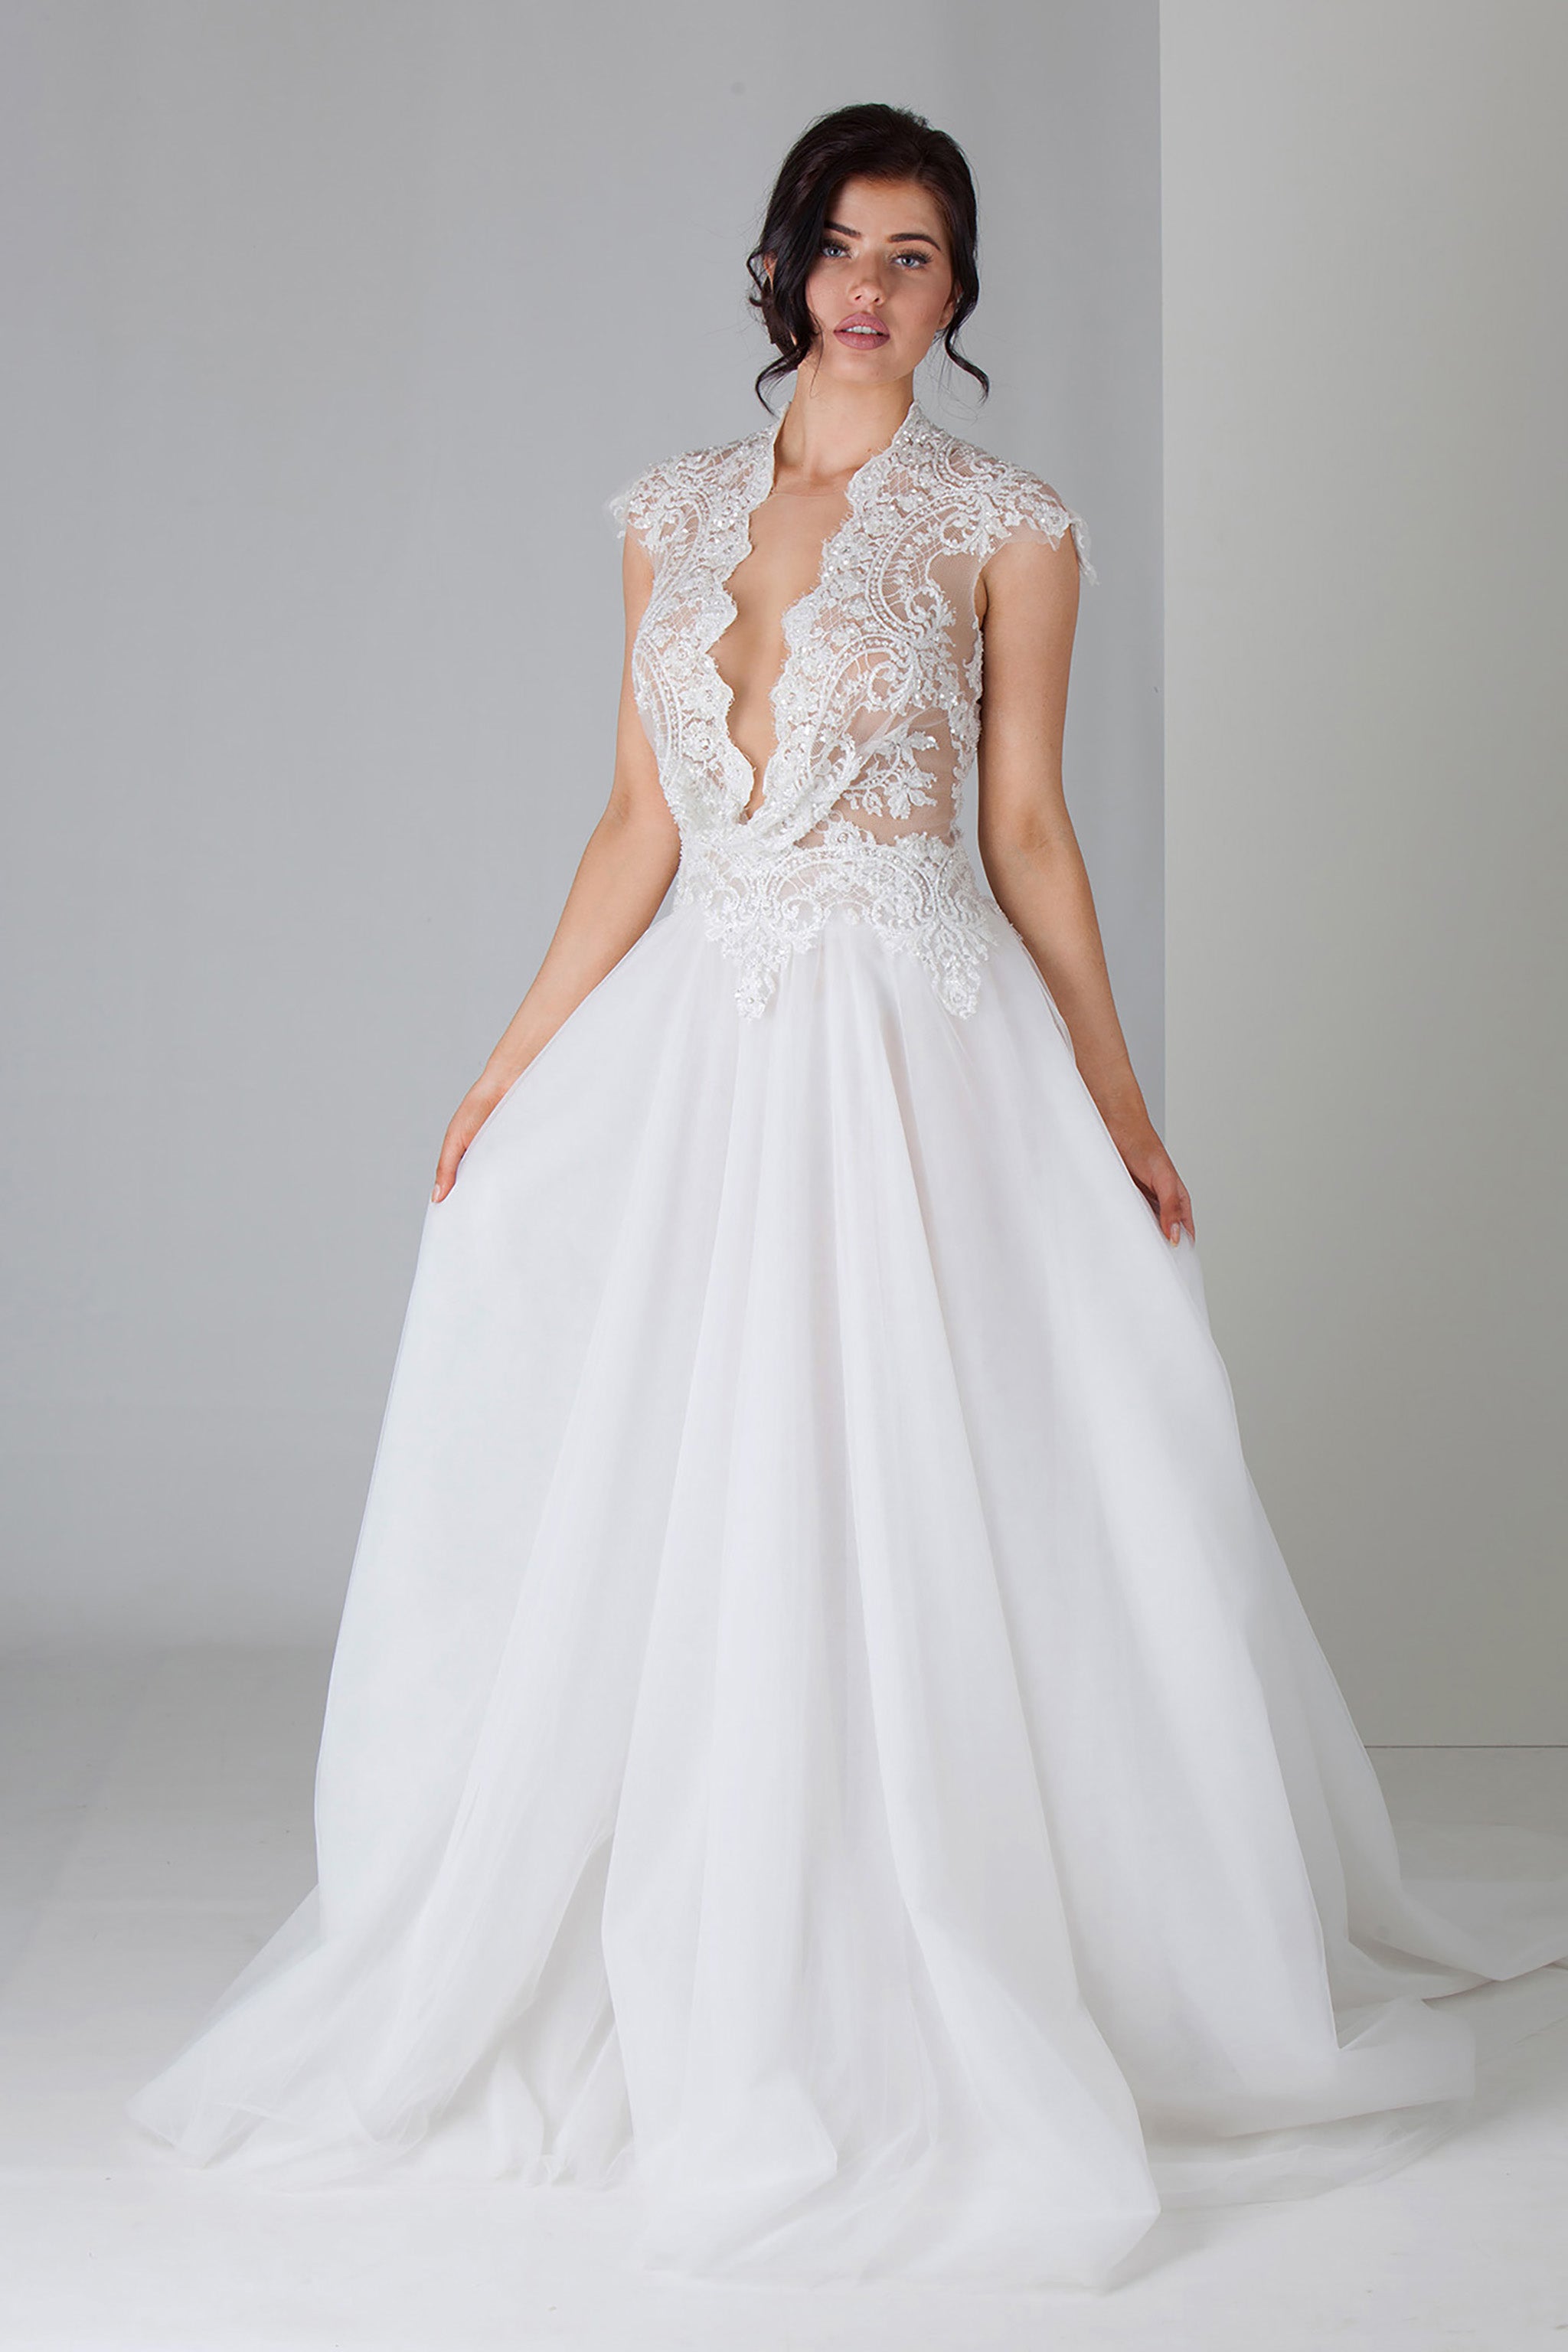 low cut v-neck wedding dress with flowing full skirt